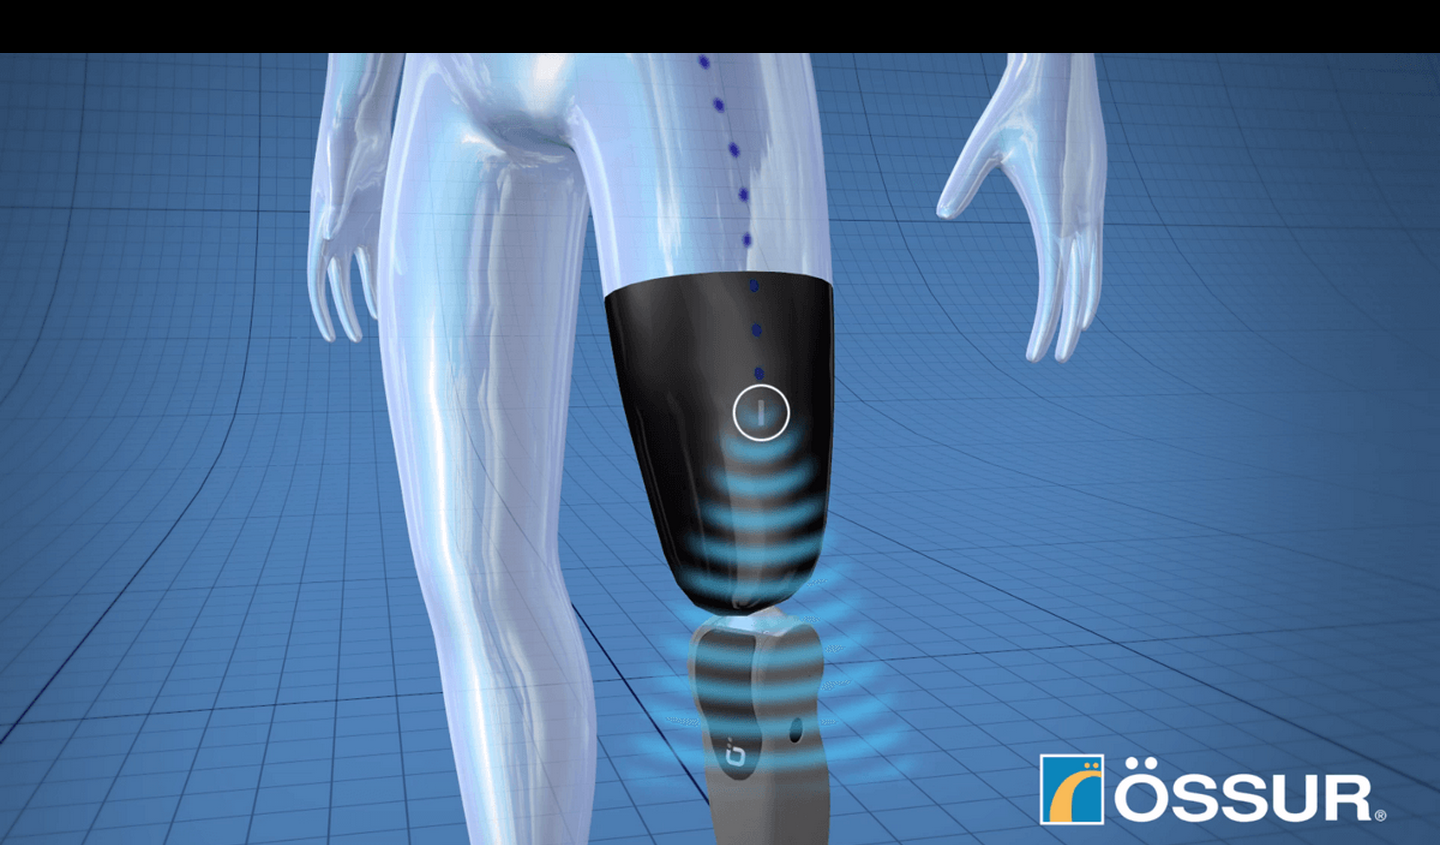 mind controlled bionic prosthetics announced screen shot 2015 05 21 at 5 12 04 pm